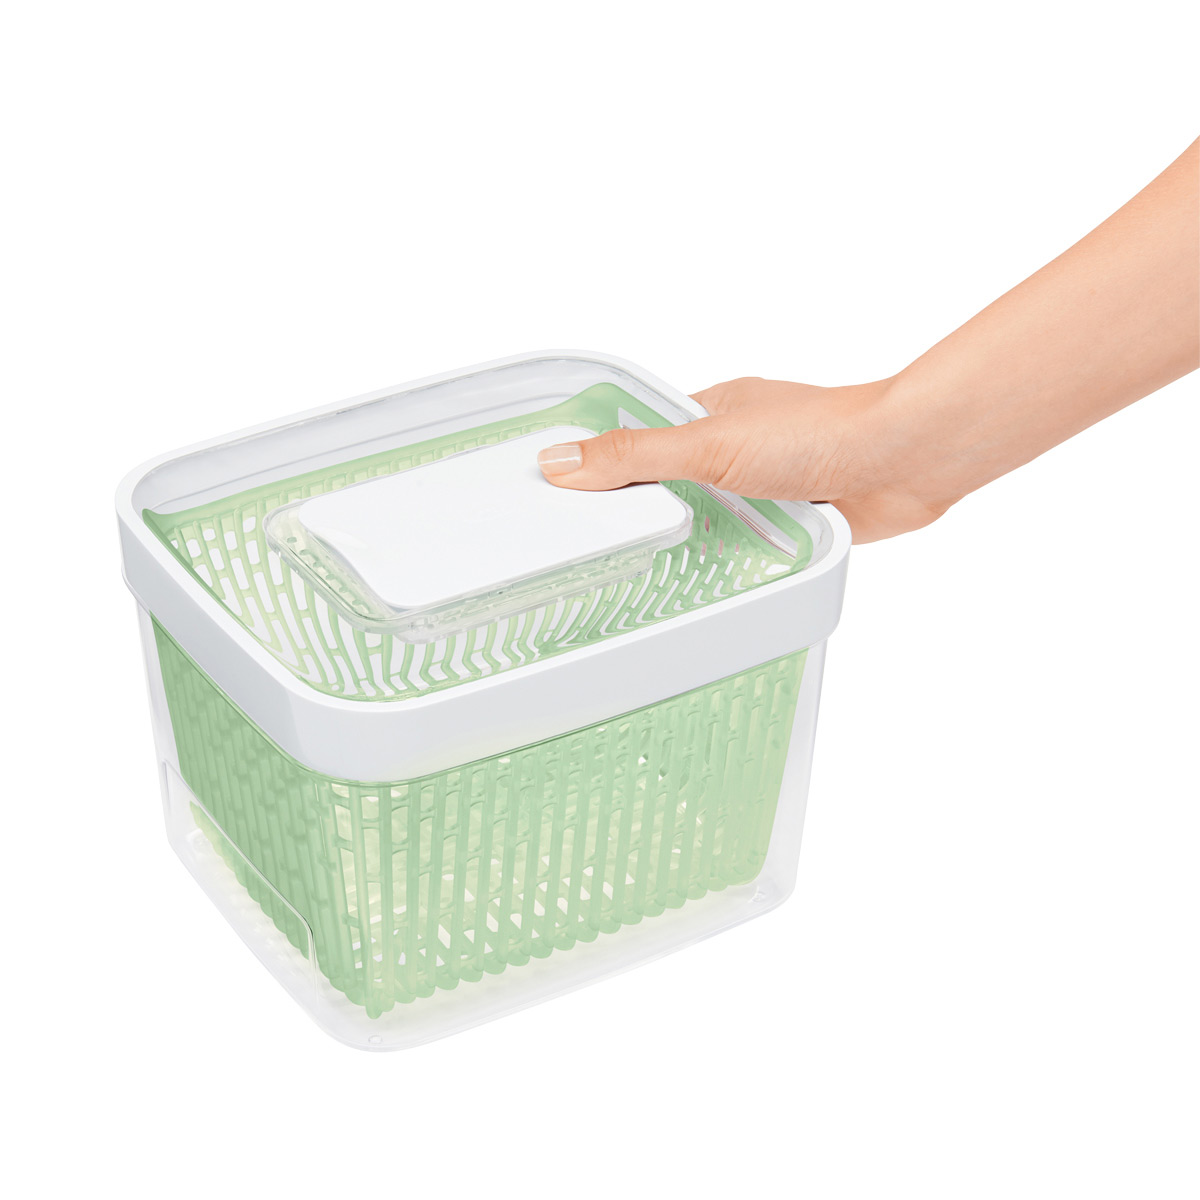 https://www.containerstore.com/catalogimages/342593/10066186-Greensaver-Produce-Keeper-4.jpg